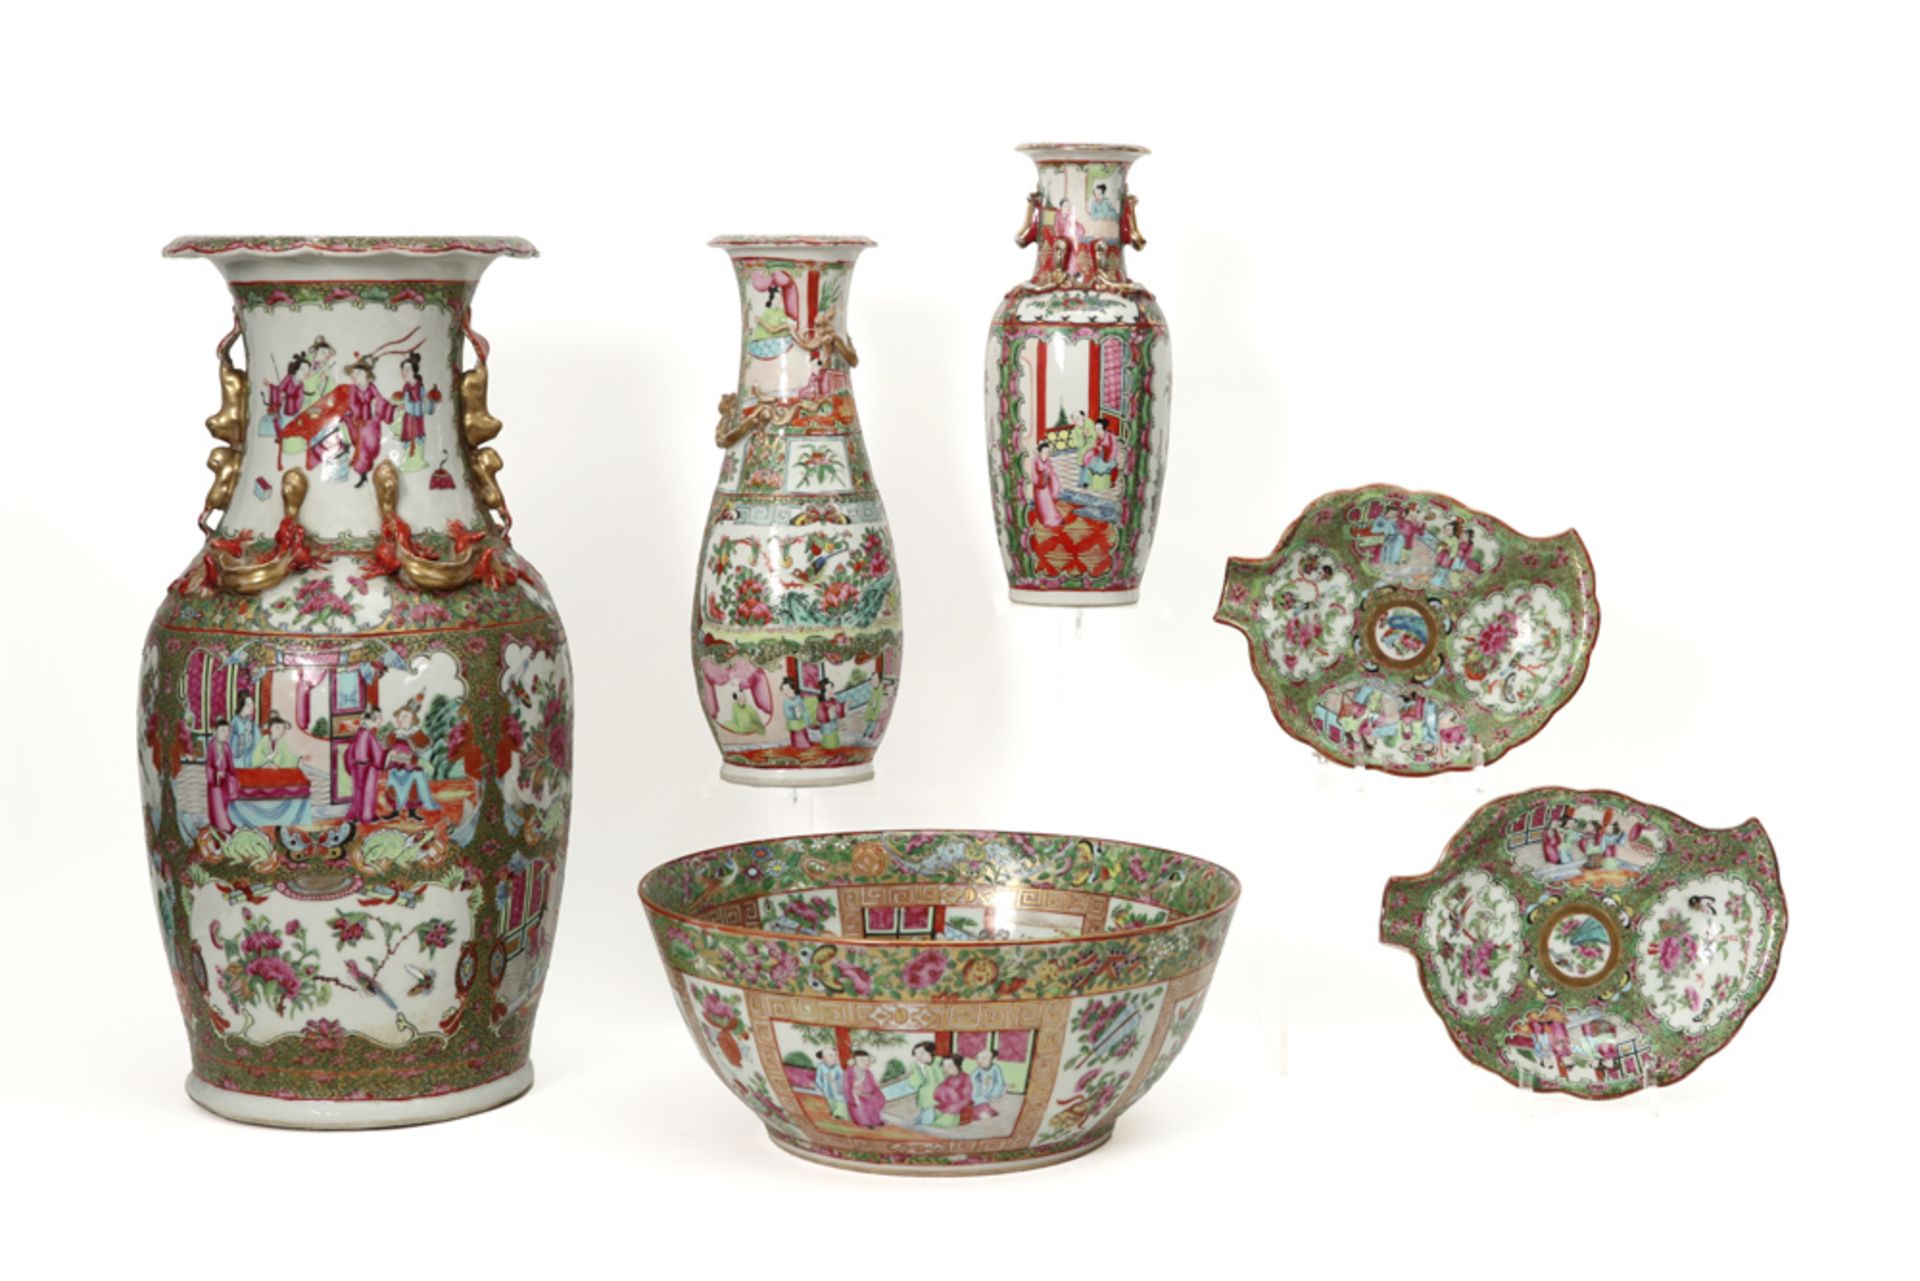 seven pieces of 19th Cent. Chinese porcelain with Cantonese decor : two vases, a bowl and two